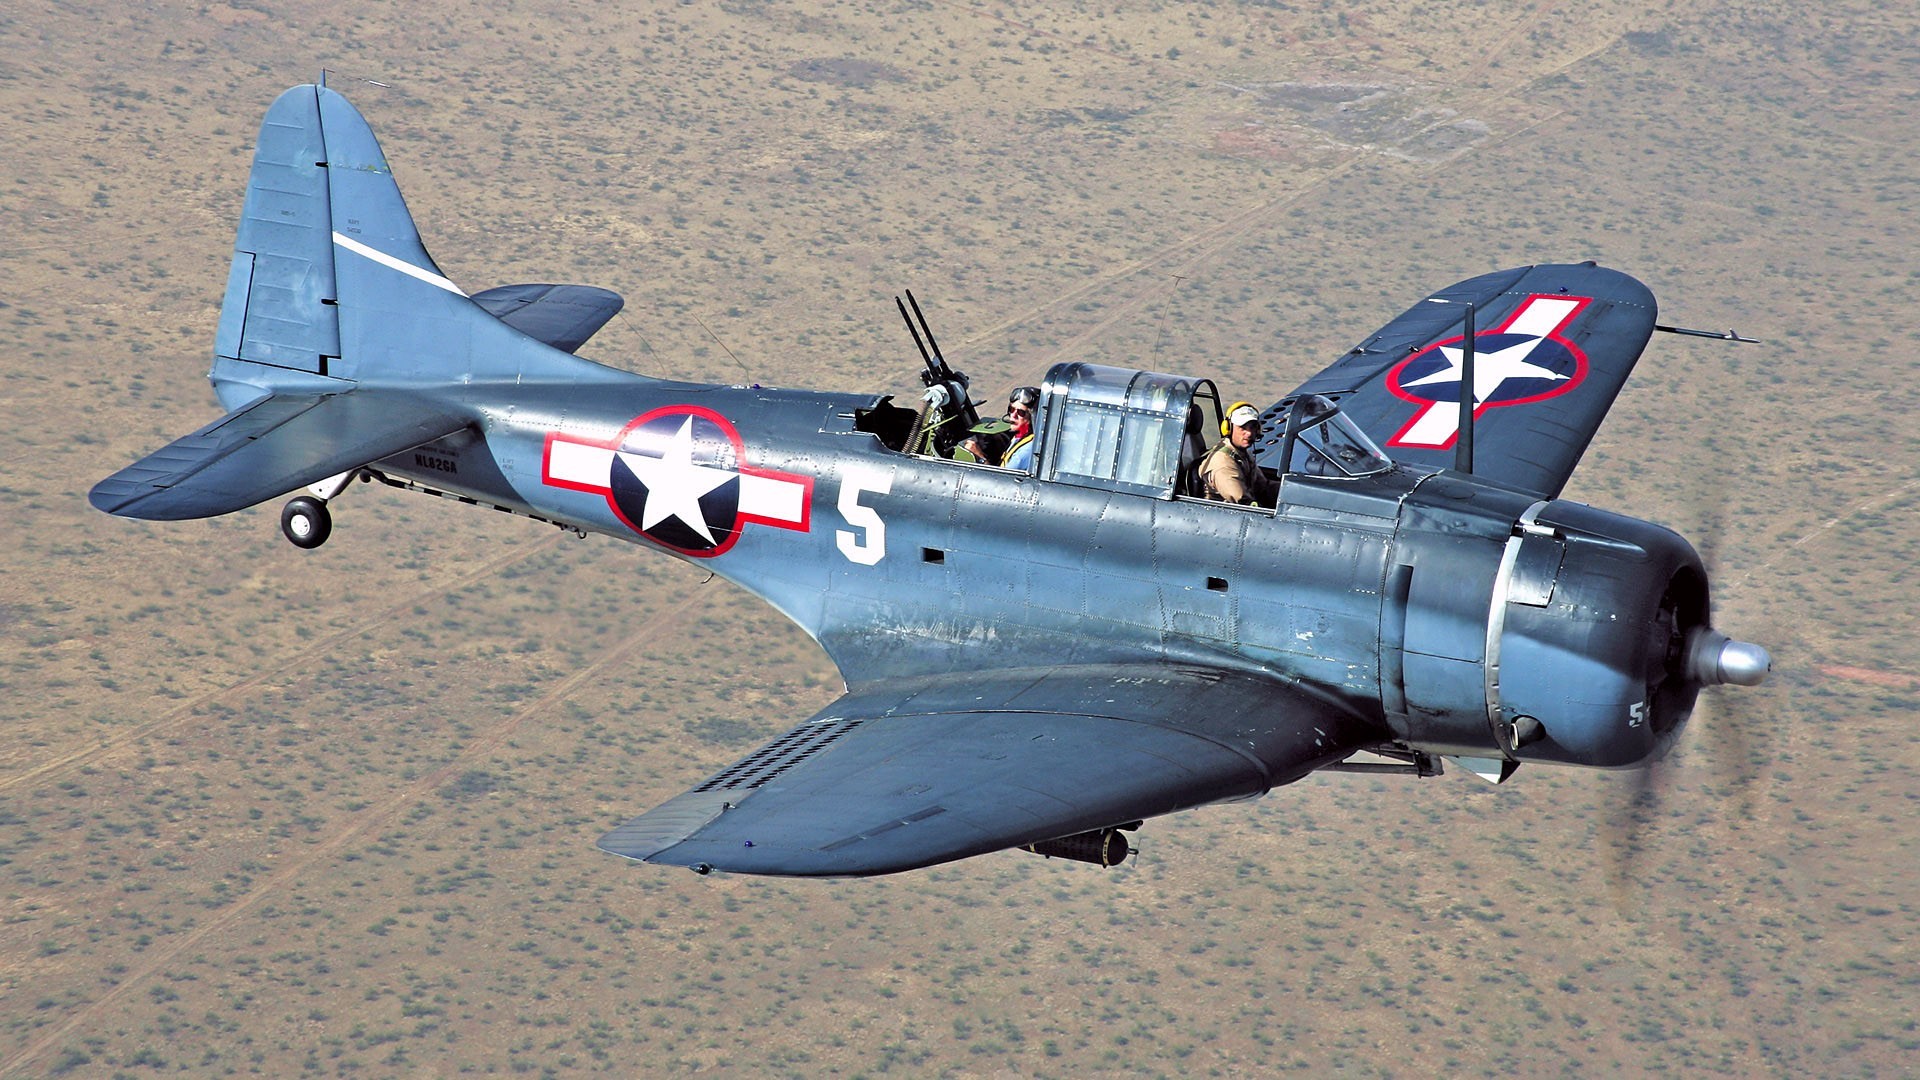 images of a sbd 3 dauntless dive bomber